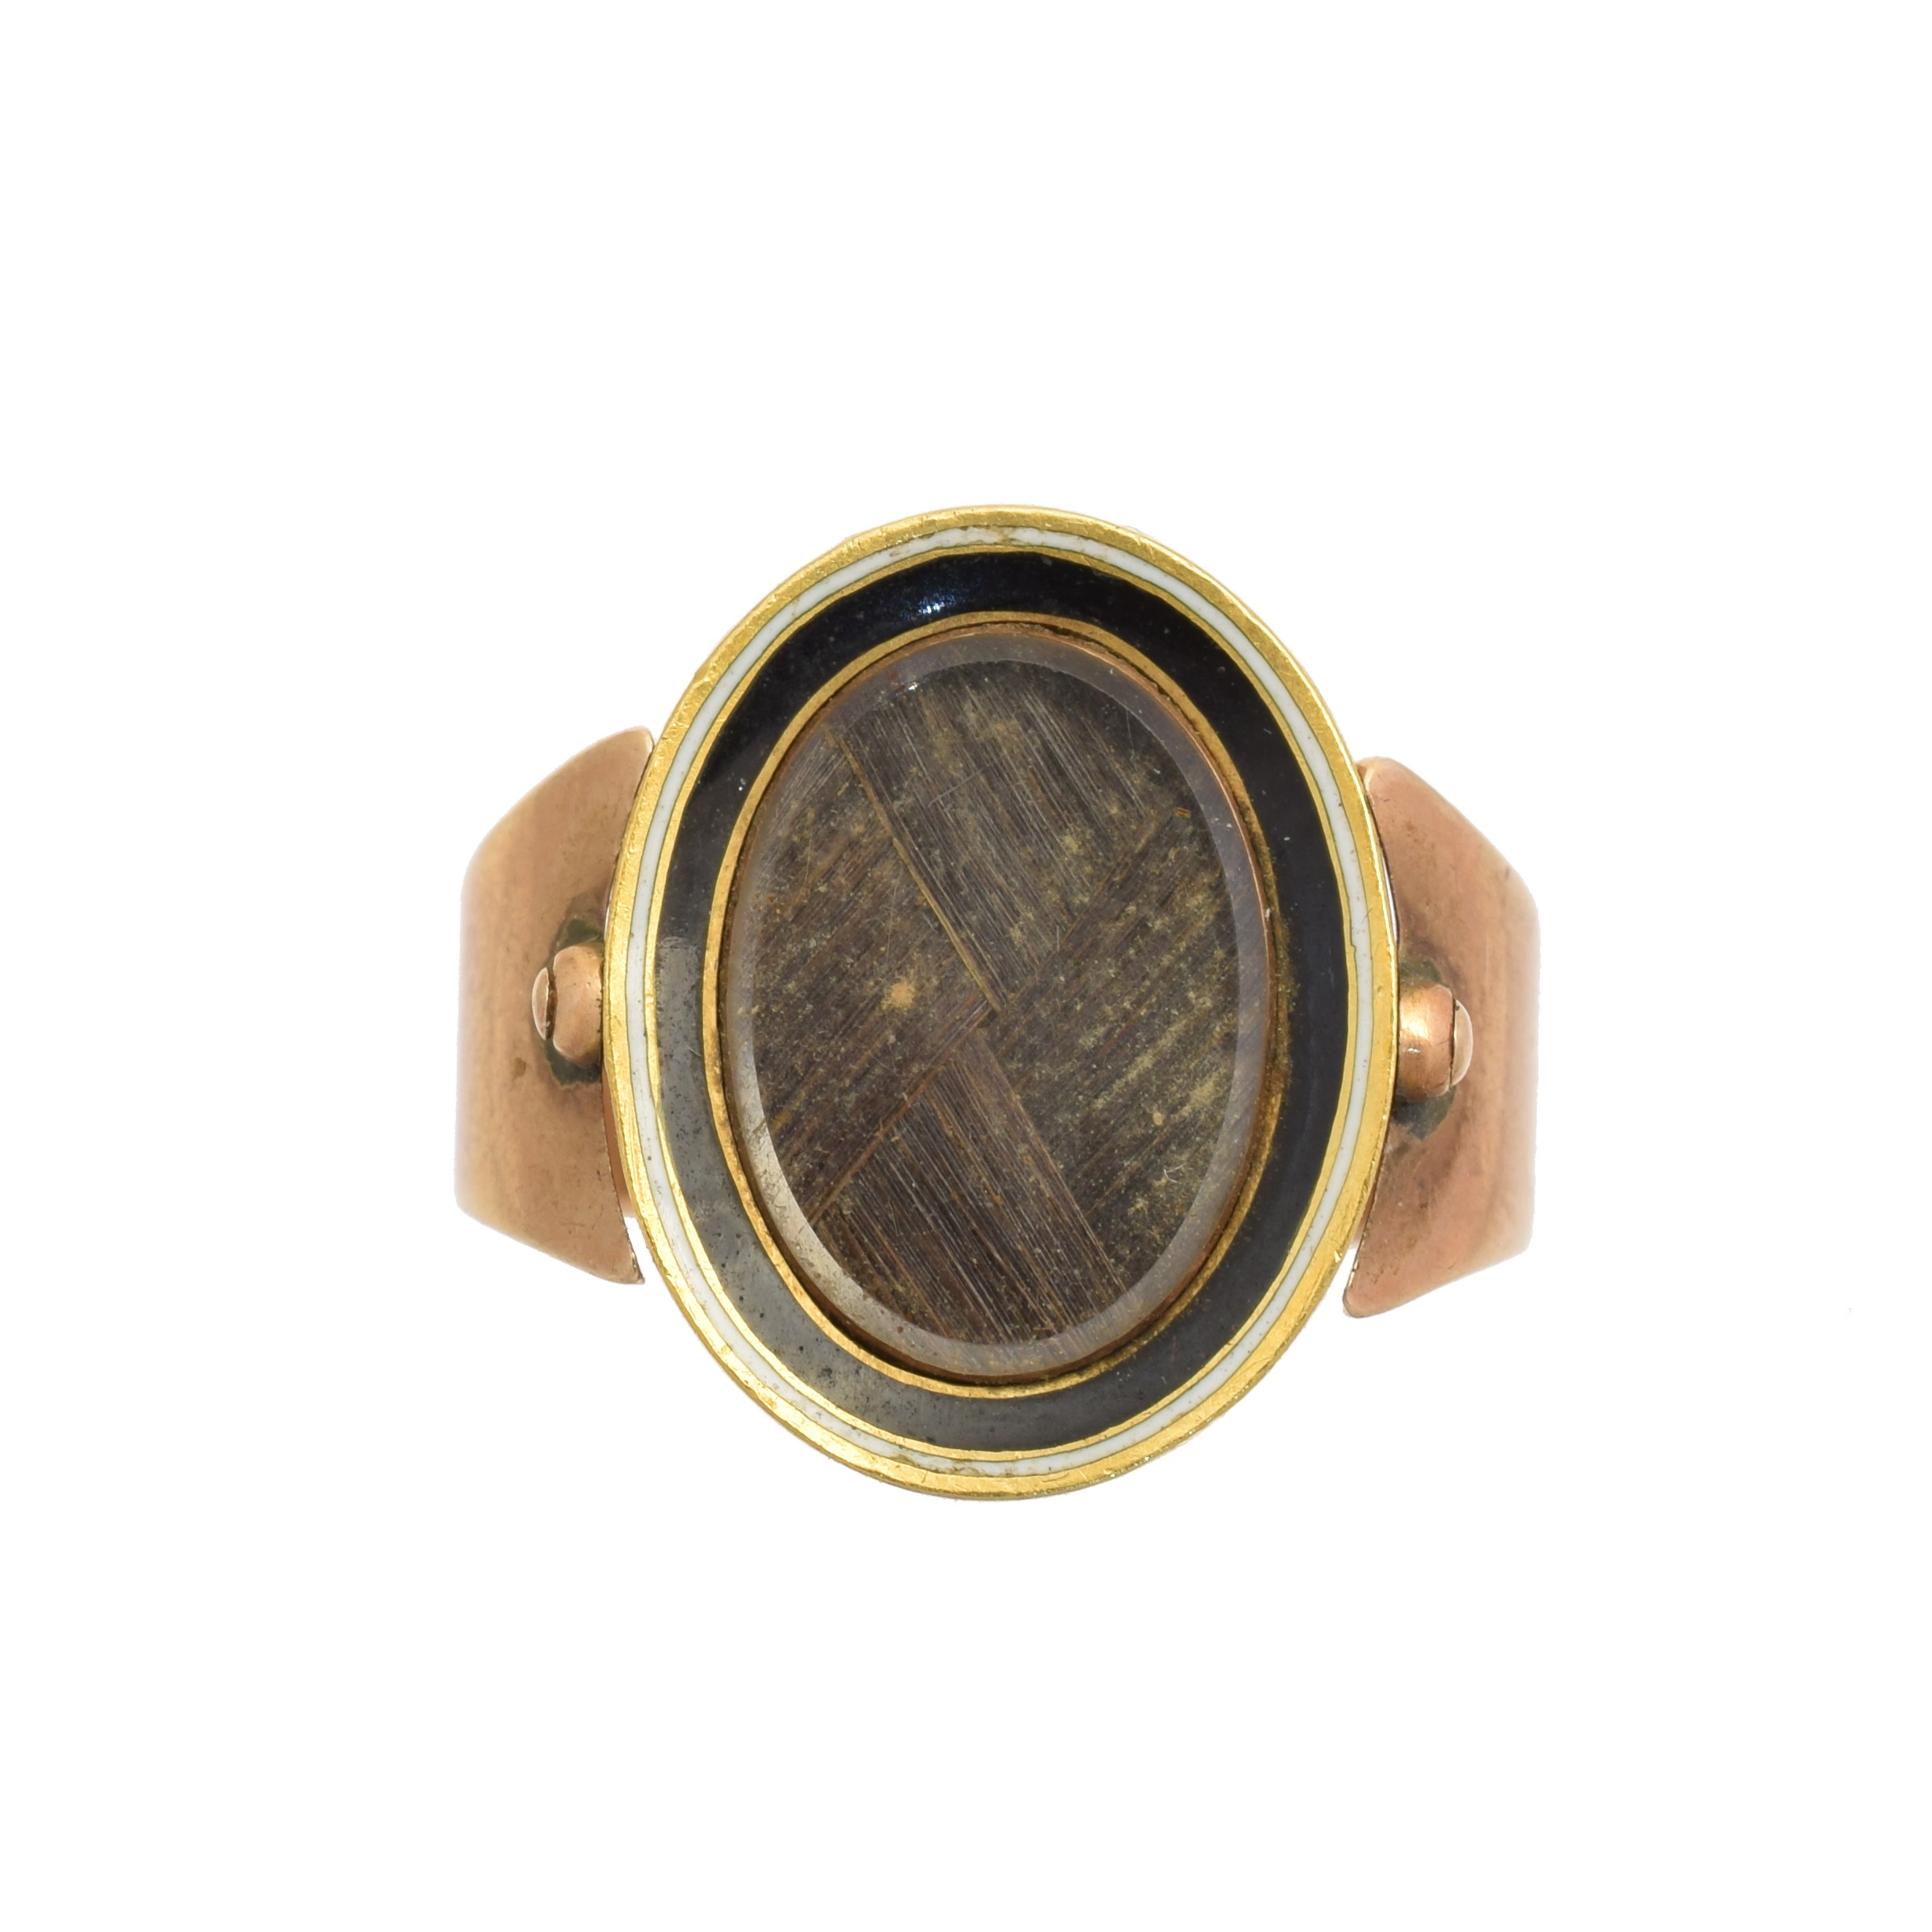 A George III swivel mourning ring, with black and enamel panel inscribed 'Honble Diana Walpole Ob:26 July 1784 Ae: 20' with hair panel to reverse, ring size H, gross weight 5.1g.     The Hon. Mrs. Diana Walpole, neé Grosset, married the Hon. Robert Walpole on 8th May 1780. Robert Walpole (1736 - 1810) was the fourth son of Horatio Walpole, 1st Baron Walpole of Wolterton, and nephew of Robert Walpole, 1st Earl of Orford, who is considered the de facto first Prime Minister of Great Britain.